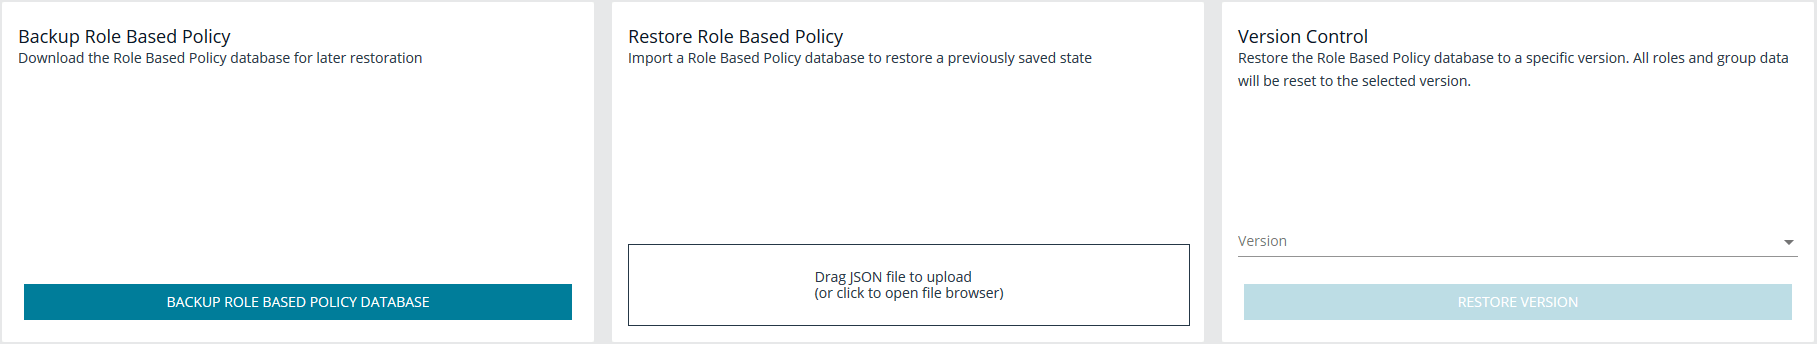 An image of the Role Based Policy Backup and Restore section in BeyondInsight for Unix & Linux.